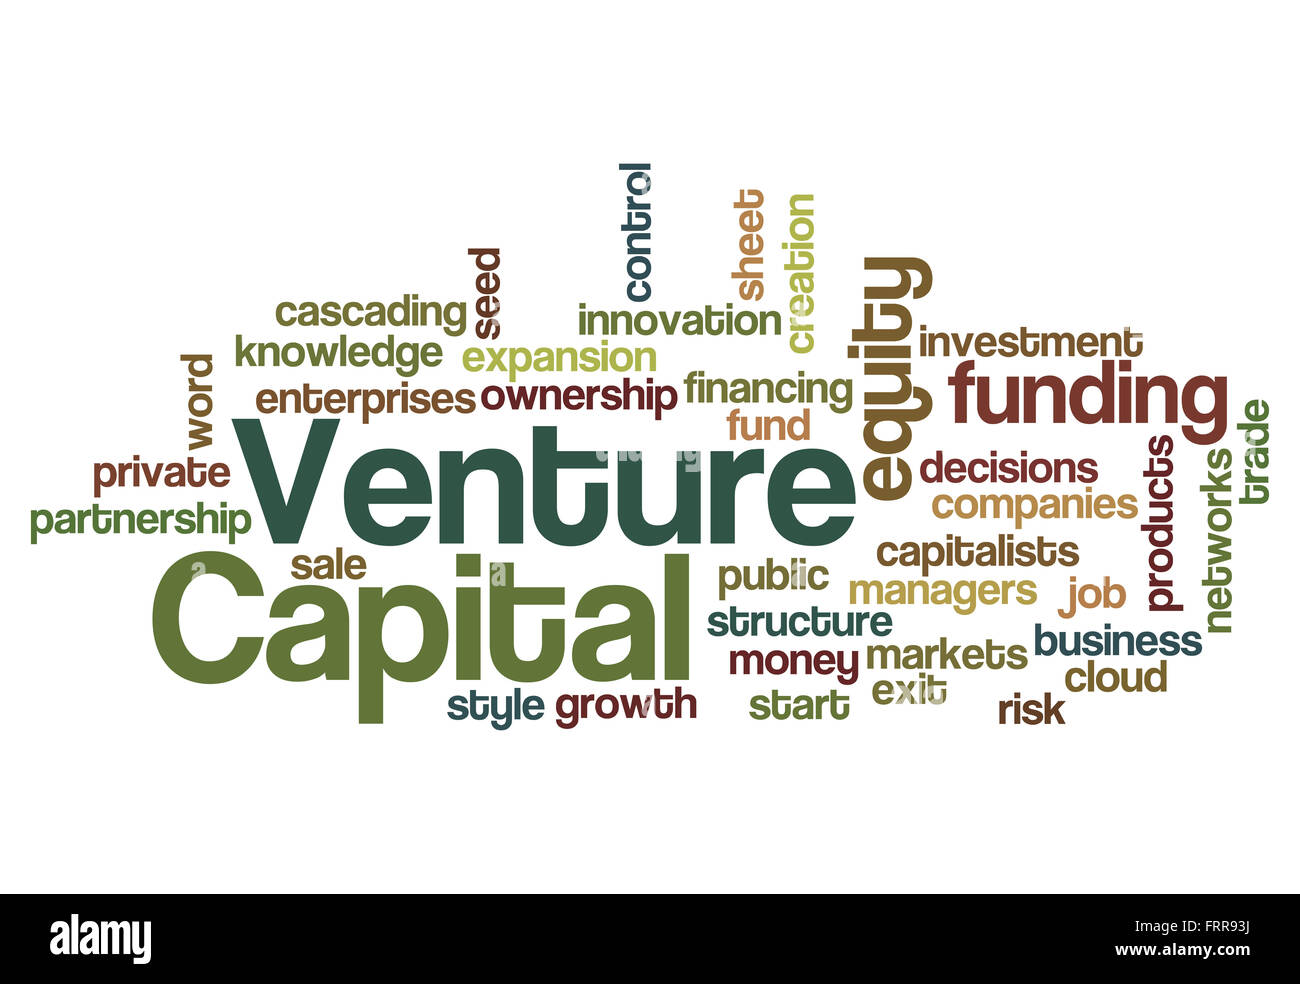 Venture capital equity funding investor concept background Stock Photo